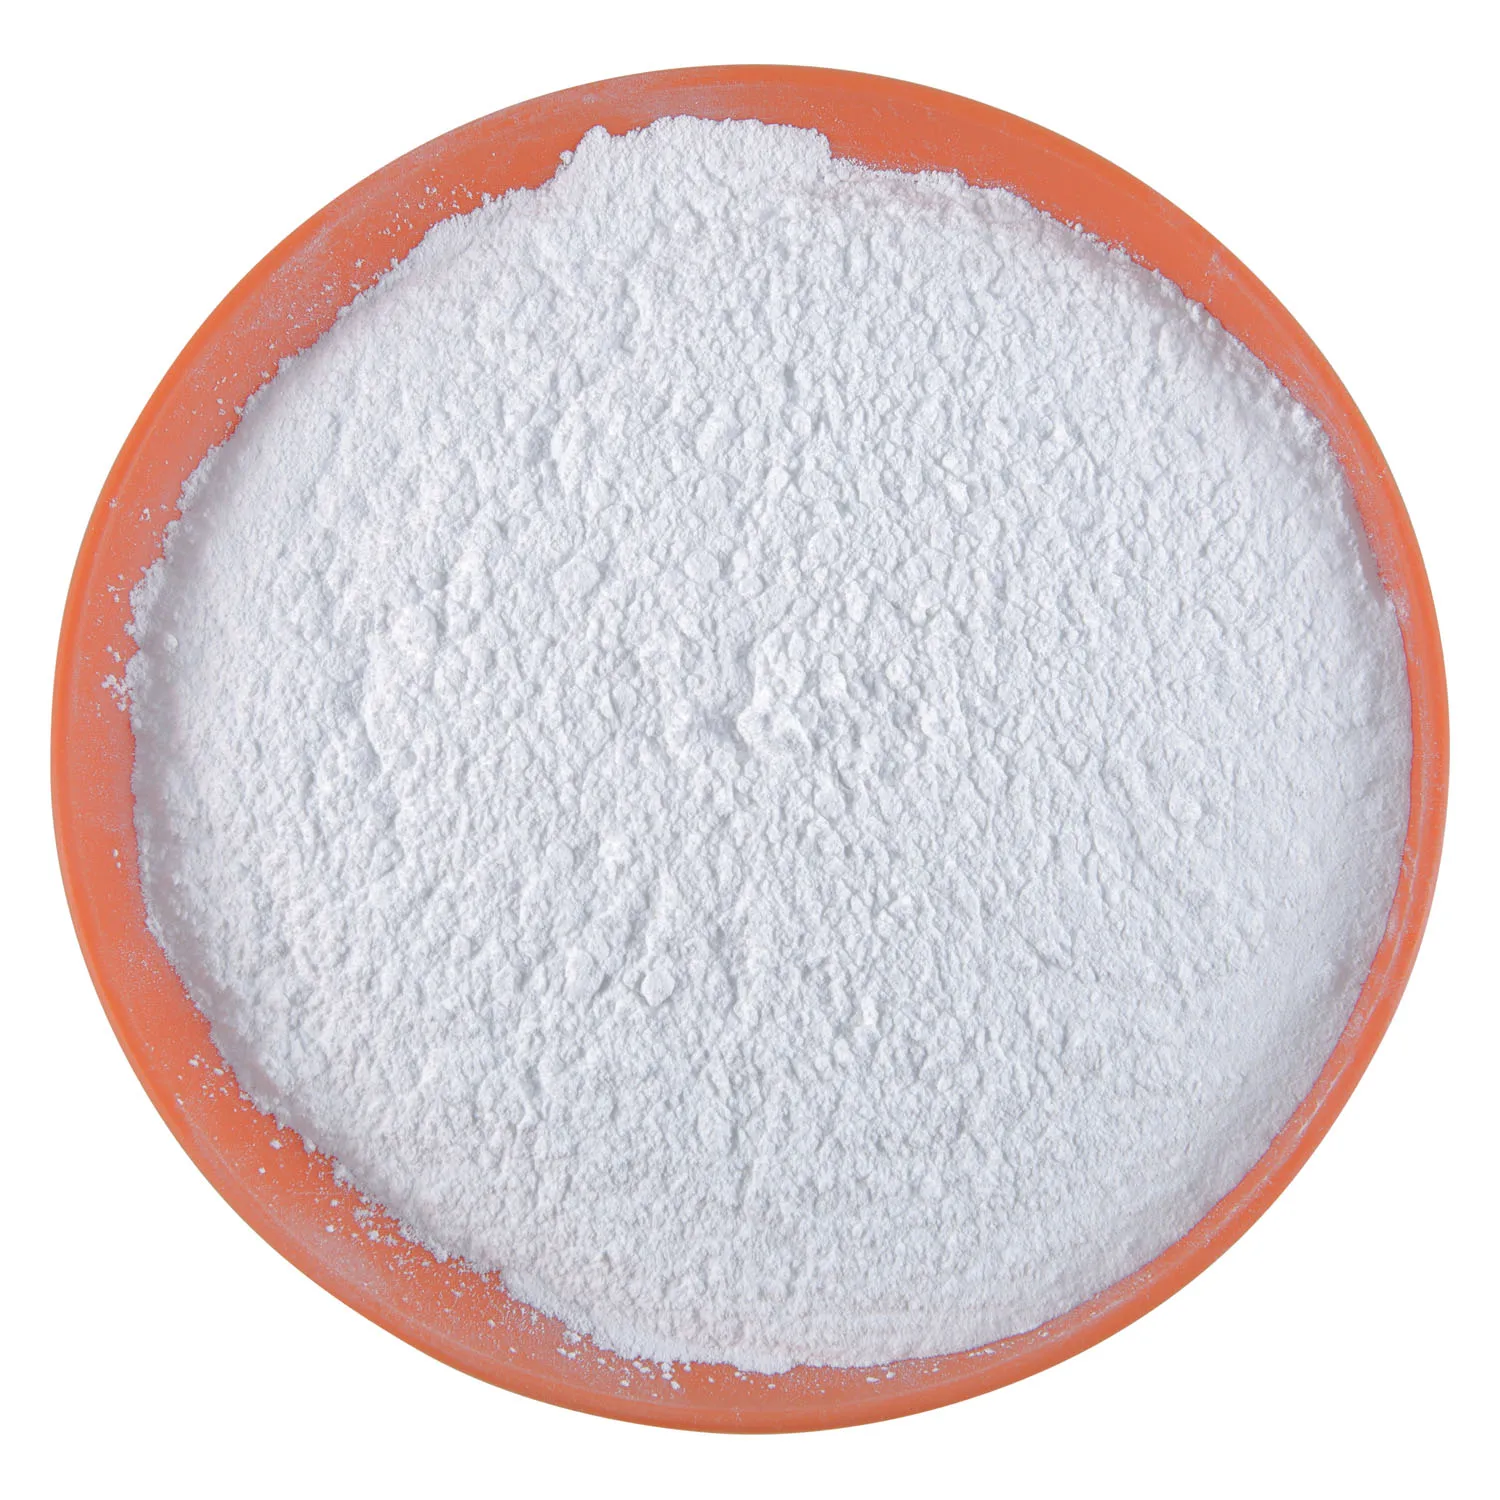 Anhydrous magnesium sulfate 19.60%